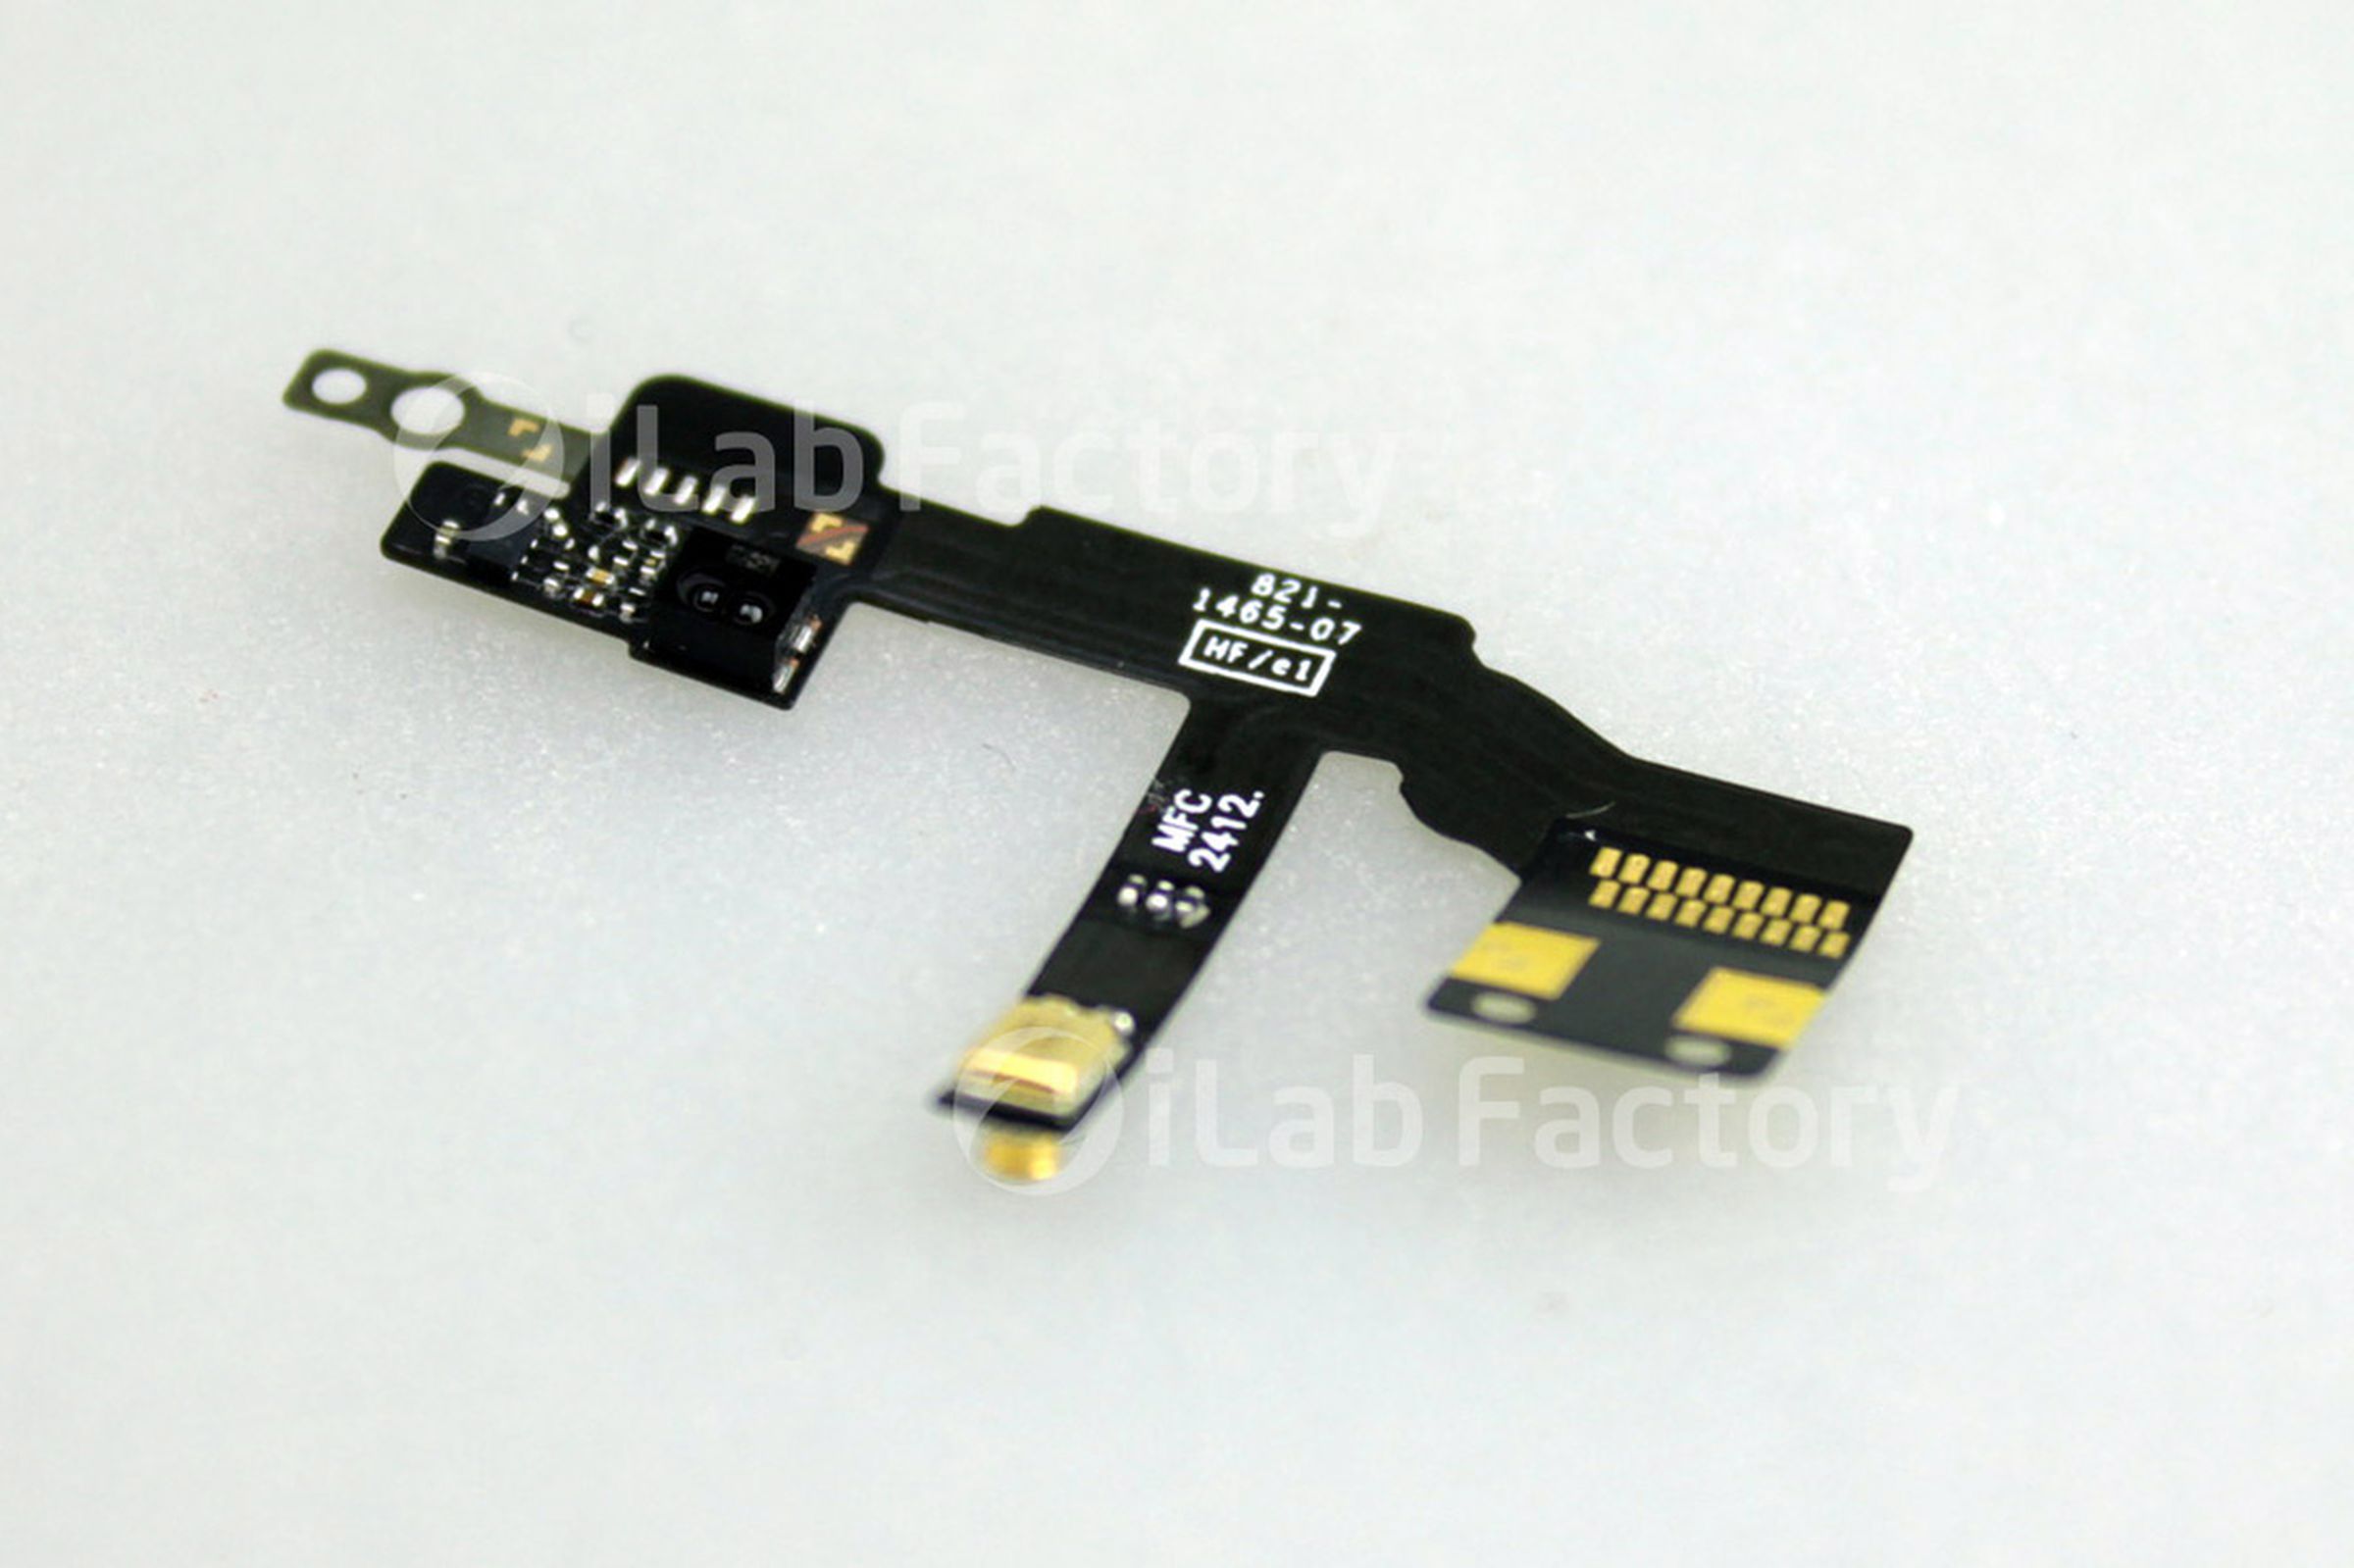 iLab Factory 'iPhone 5' pictures